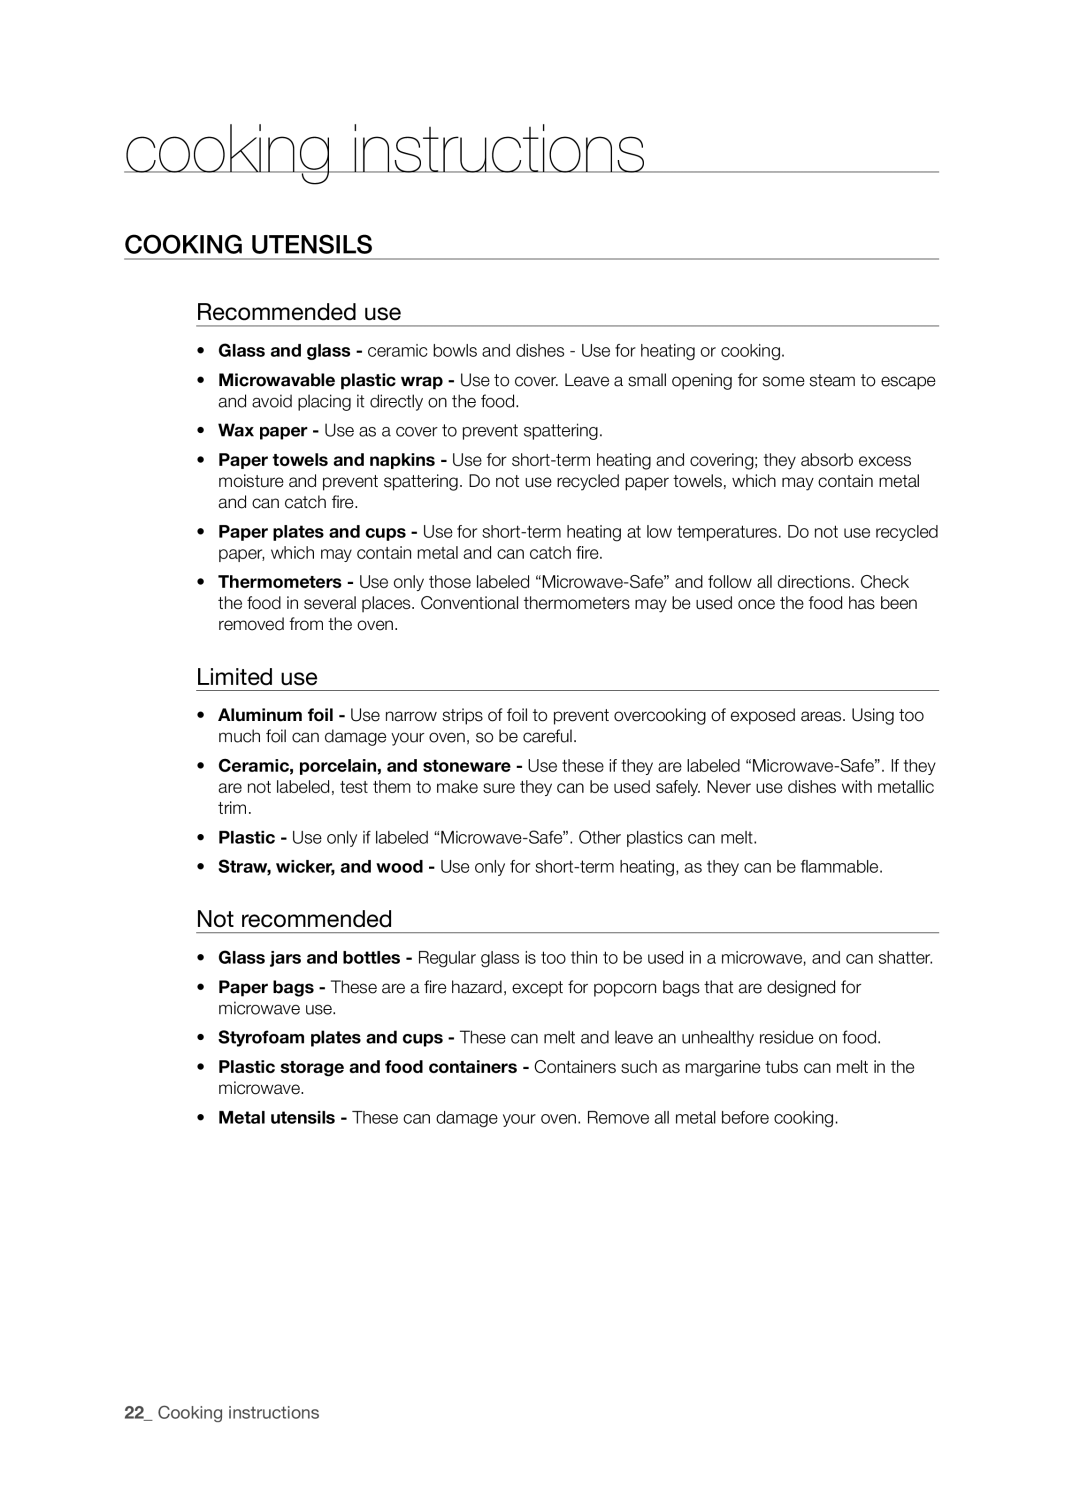 Samsung SMH5165 user manual cooking instructions, Cooking utensils, Recommended use, Limited use, Not recommended 